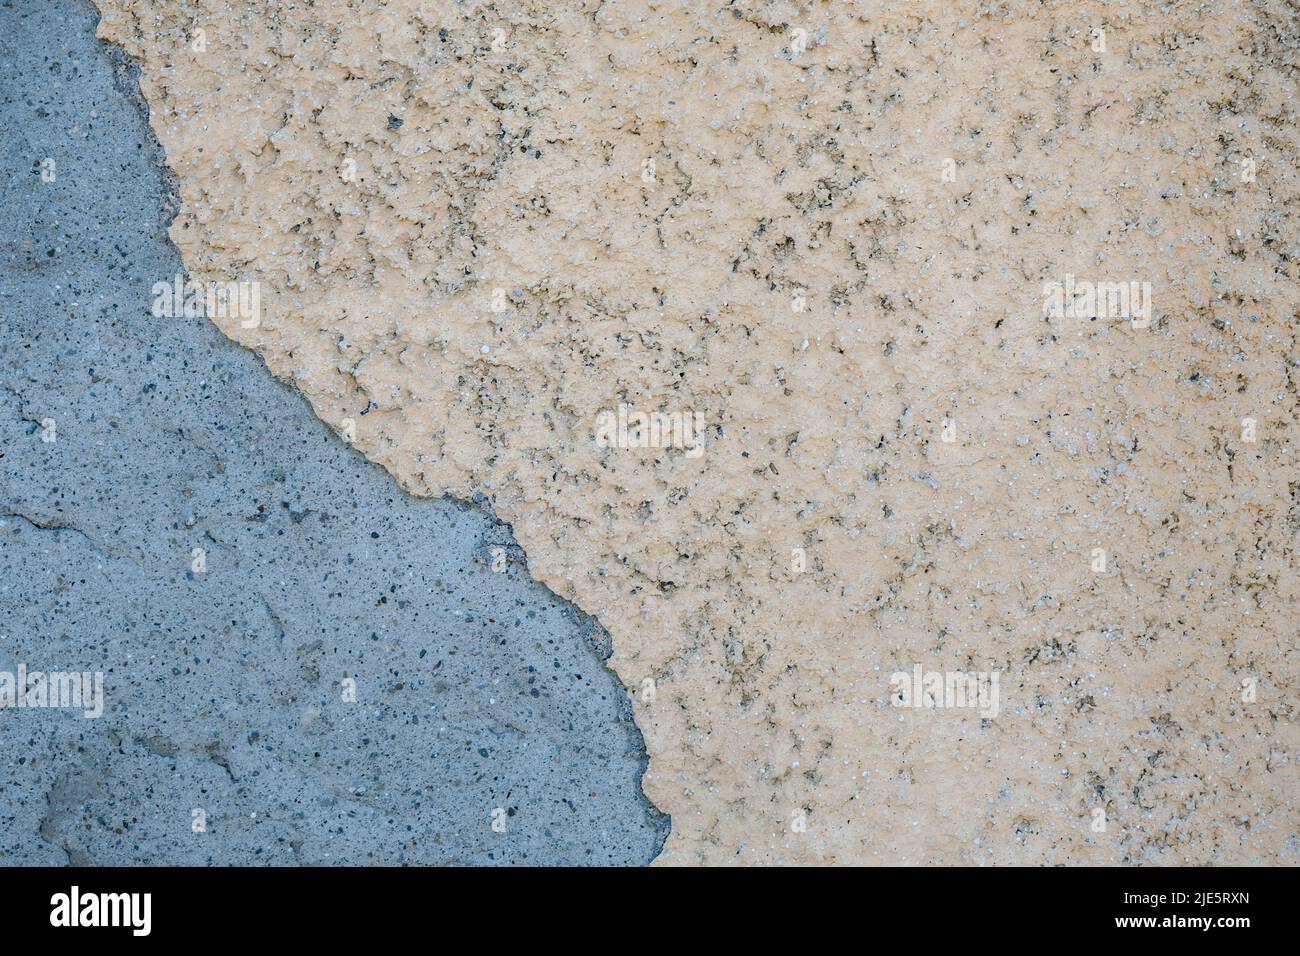 Worn stucco and concrete for textures and backgrounds. Stock Photo